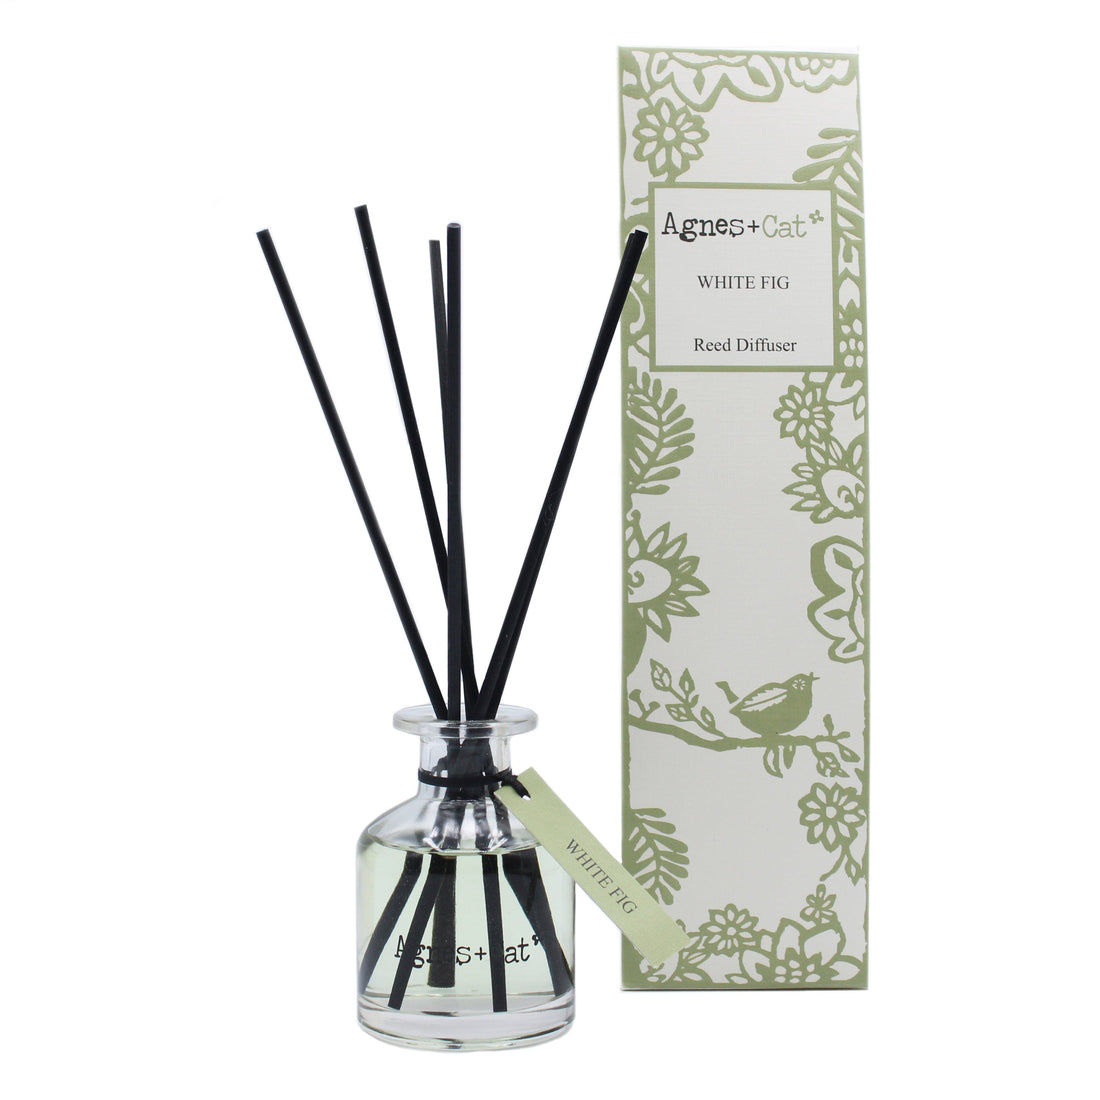 Box of 140ml Reed Diffuser - White Fig - best price from Maltashopper.com ACD-20DS